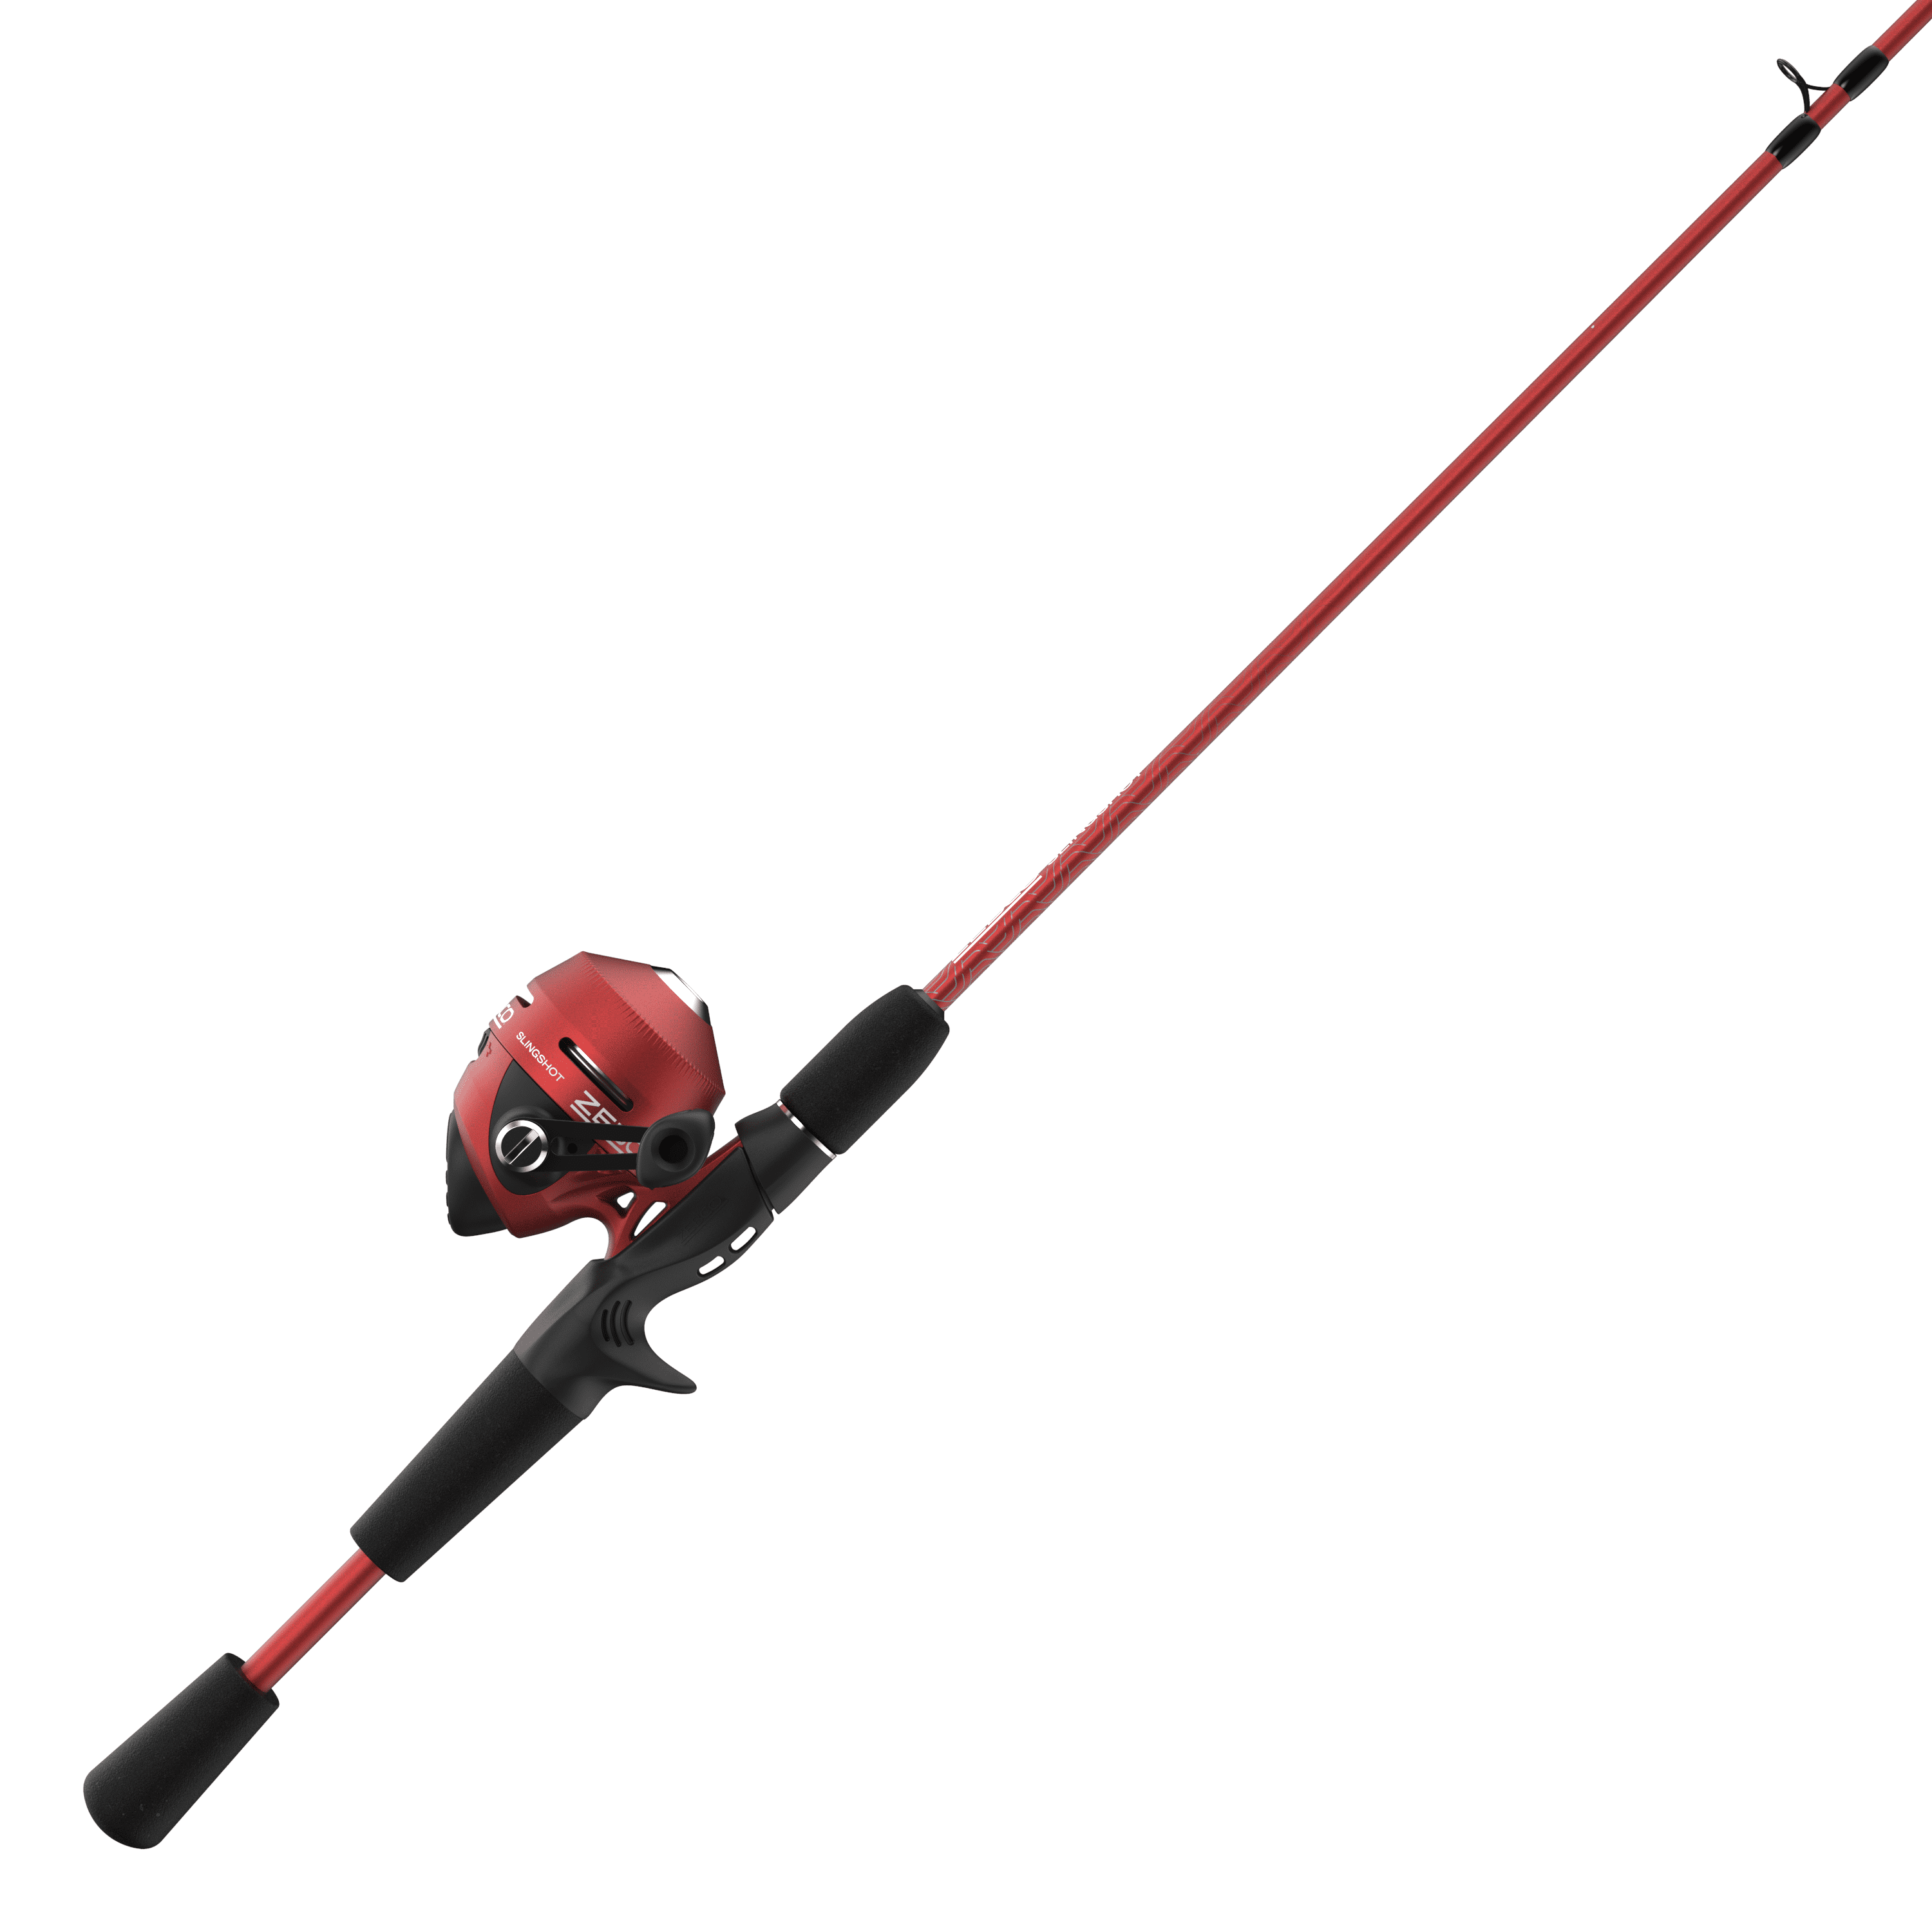 Zebco Slingshot Spincast Reel and Fishing Rod Combo, 5-Foot 6-Inch 2-Piece  Fishing Pole, Size 30 Reel, Right-Hand Retrieve, Pre-Spooled with 10-Pound